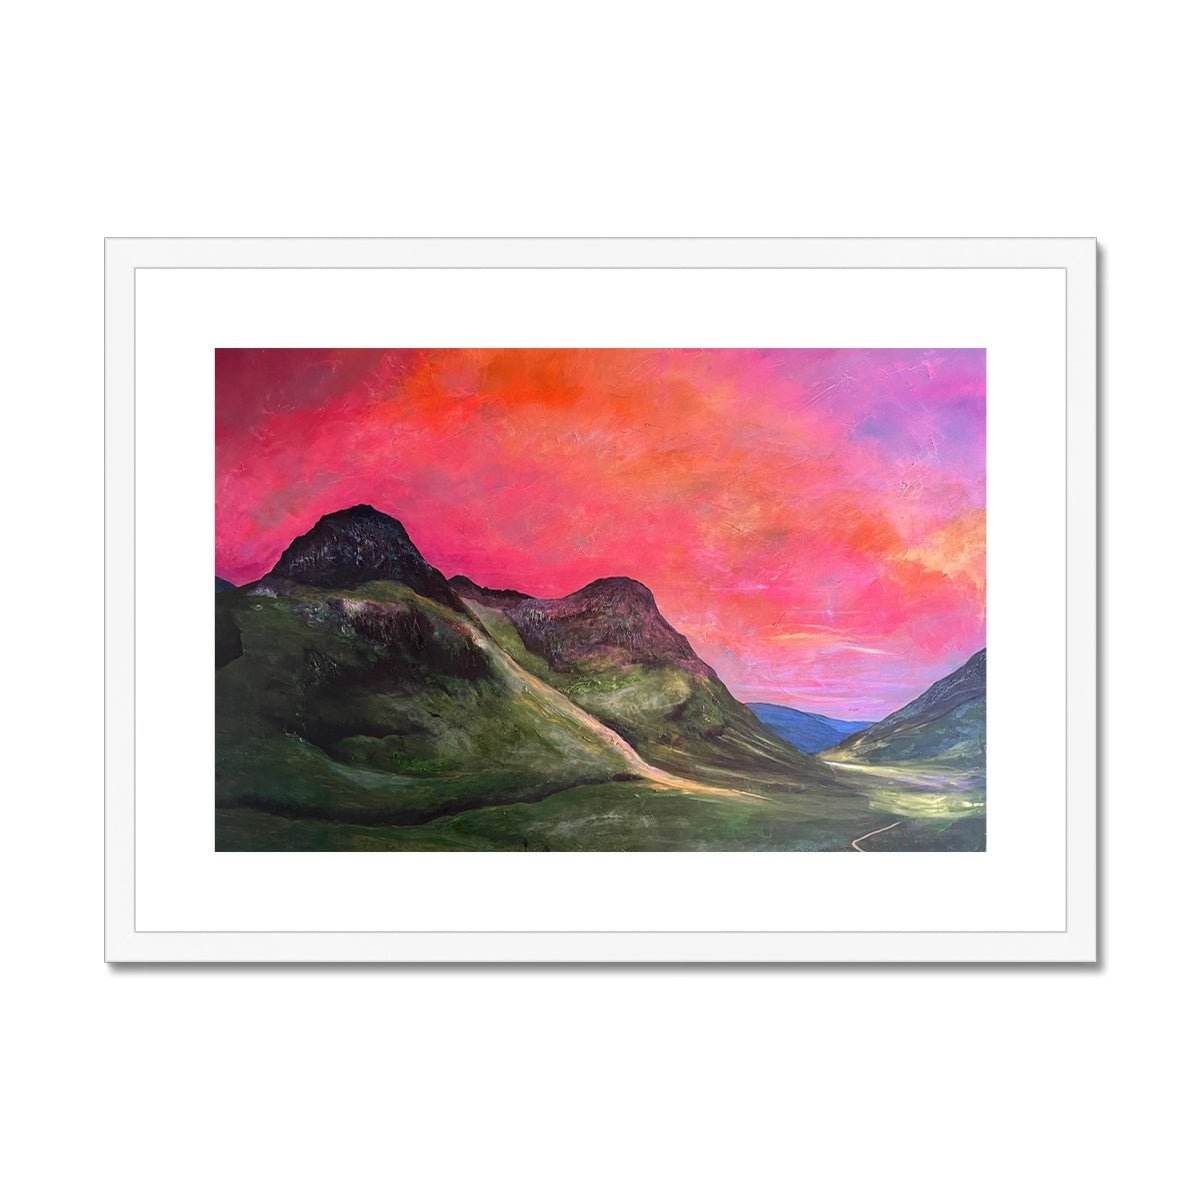 Glencoe Dusk Painting | Framed & Mounted Prints From Scotland-Framed & Mounted Prints-Glencoe Art Gallery-A2 Landscape-White Frame-Paintings, Prints, Homeware, Art Gifts From Scotland By Scottish Artist Kevin Hunter